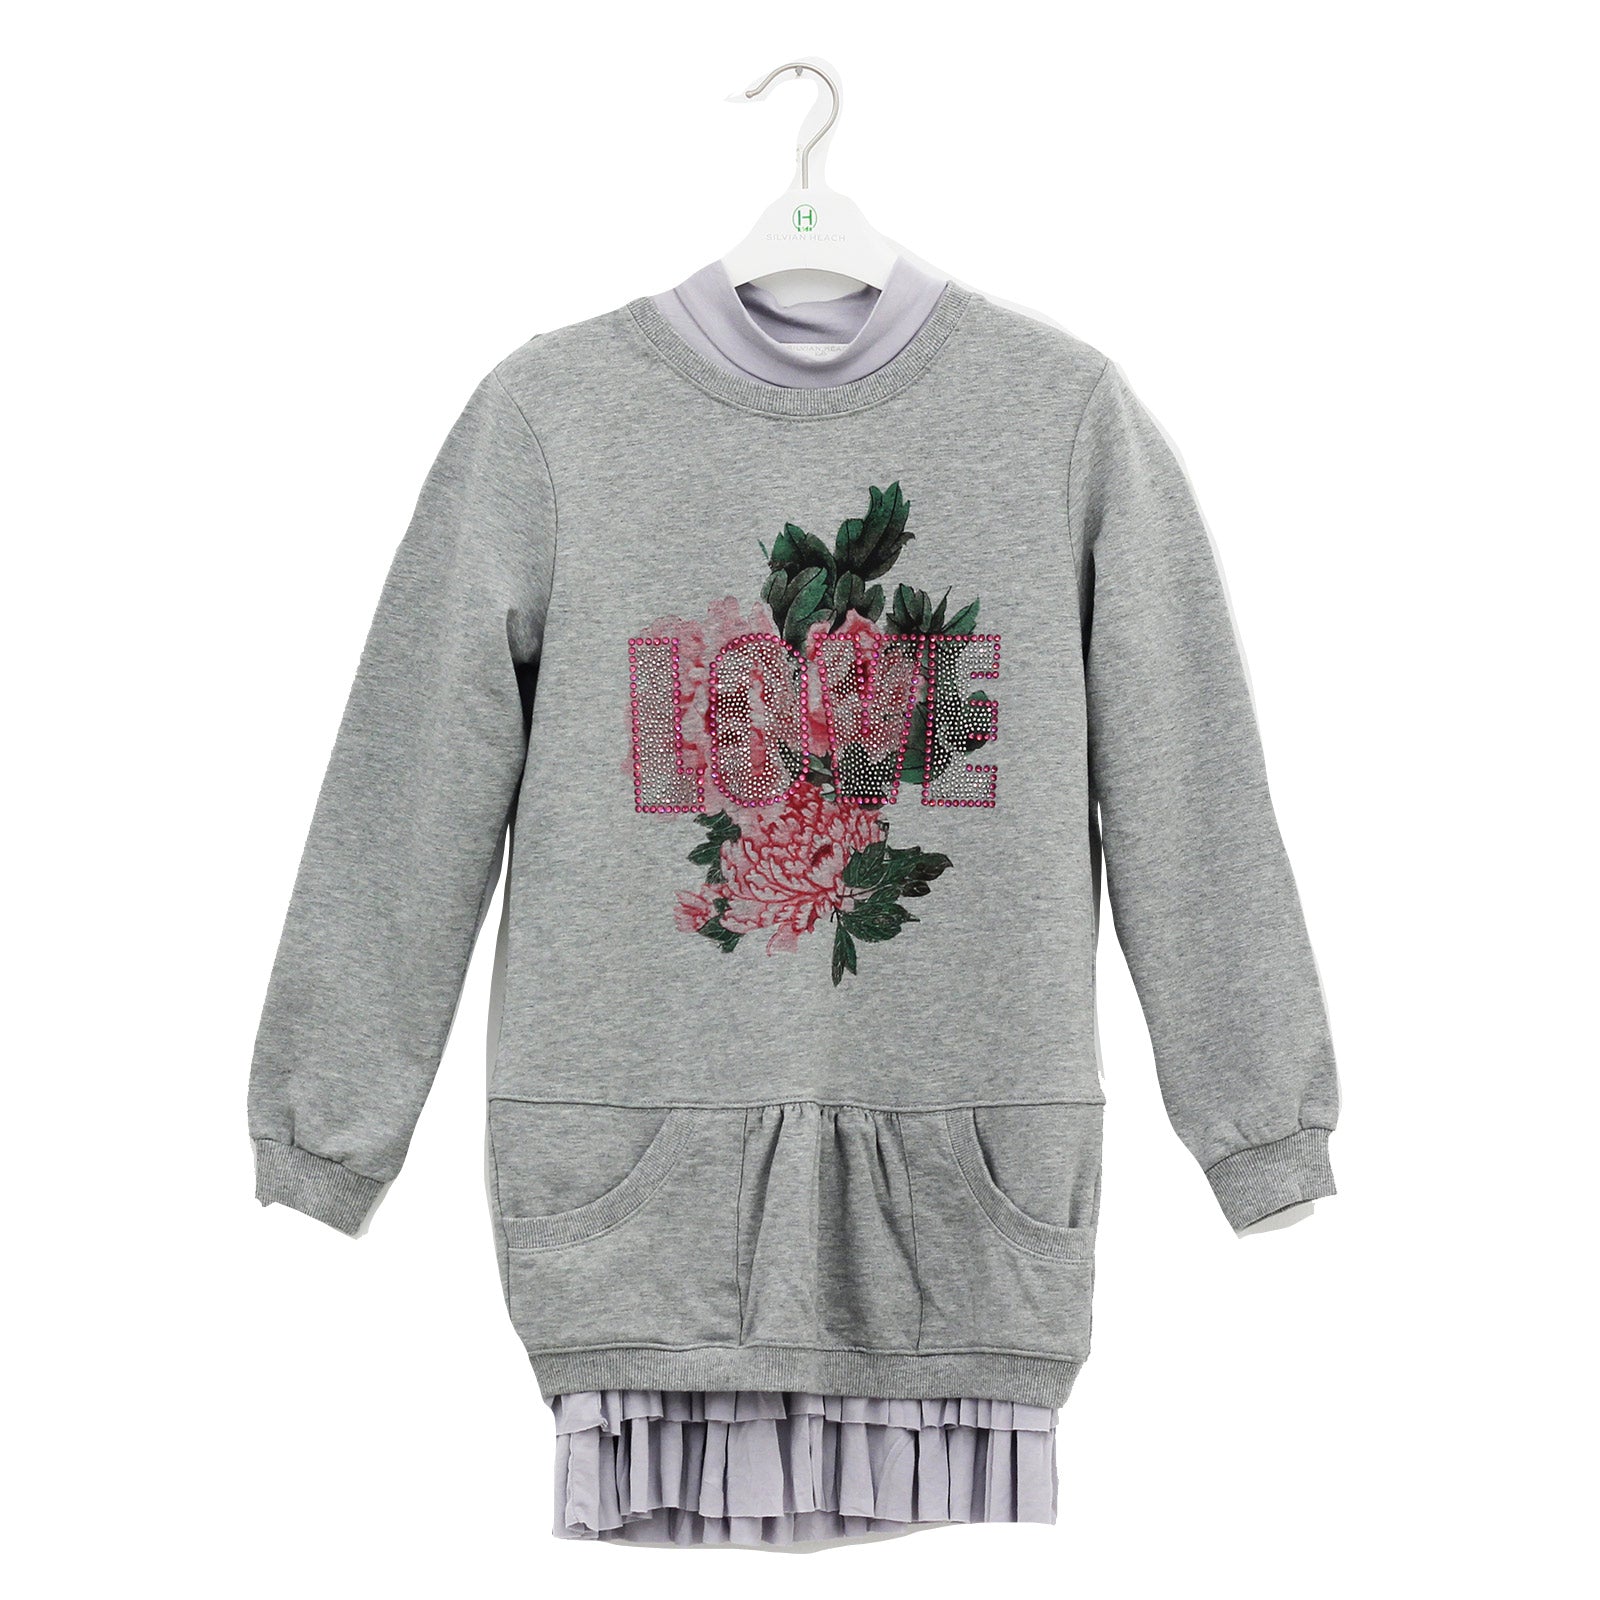 
  Dress from the Silvian Heach Kids clothing line in double layer composed of crew neck sweatshi...